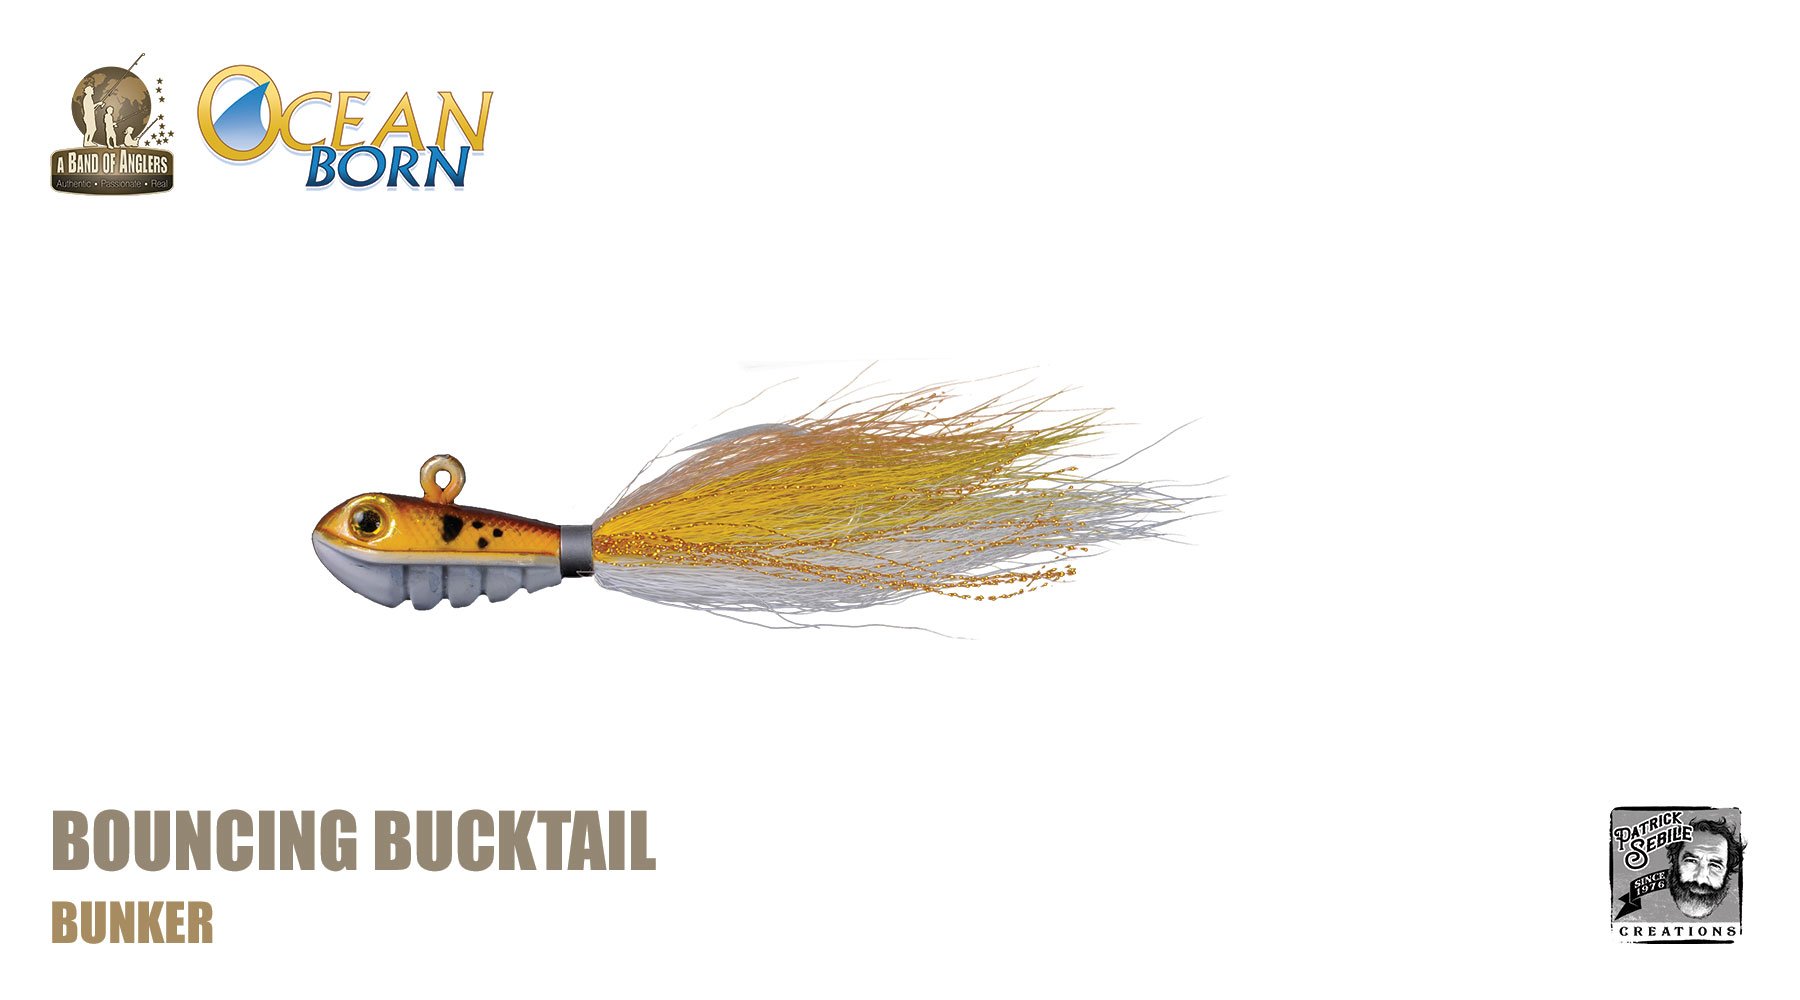 Bouncing Bucktail – A Band of Anglers Inc.